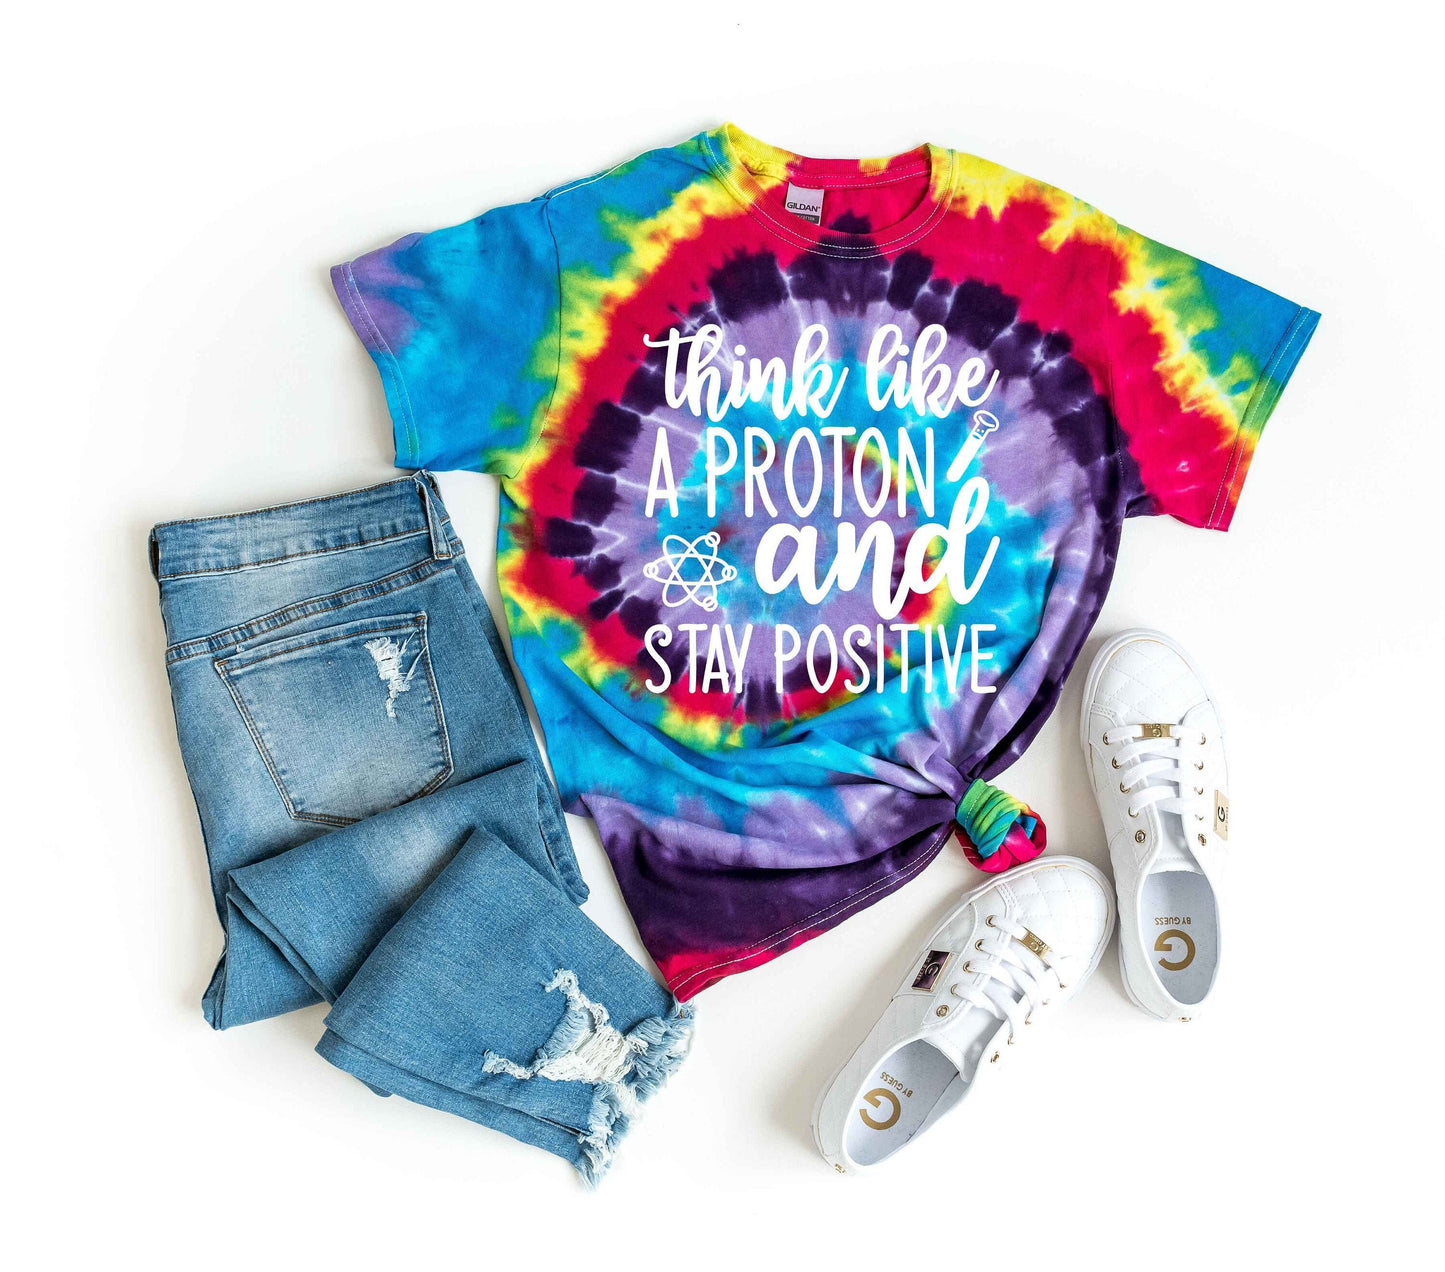 Think Like a Proton And Stay Positive Tie Dye Shirt - Science Shirt - Chemistry Shirt - Science Tee - Science Teacher Shirt